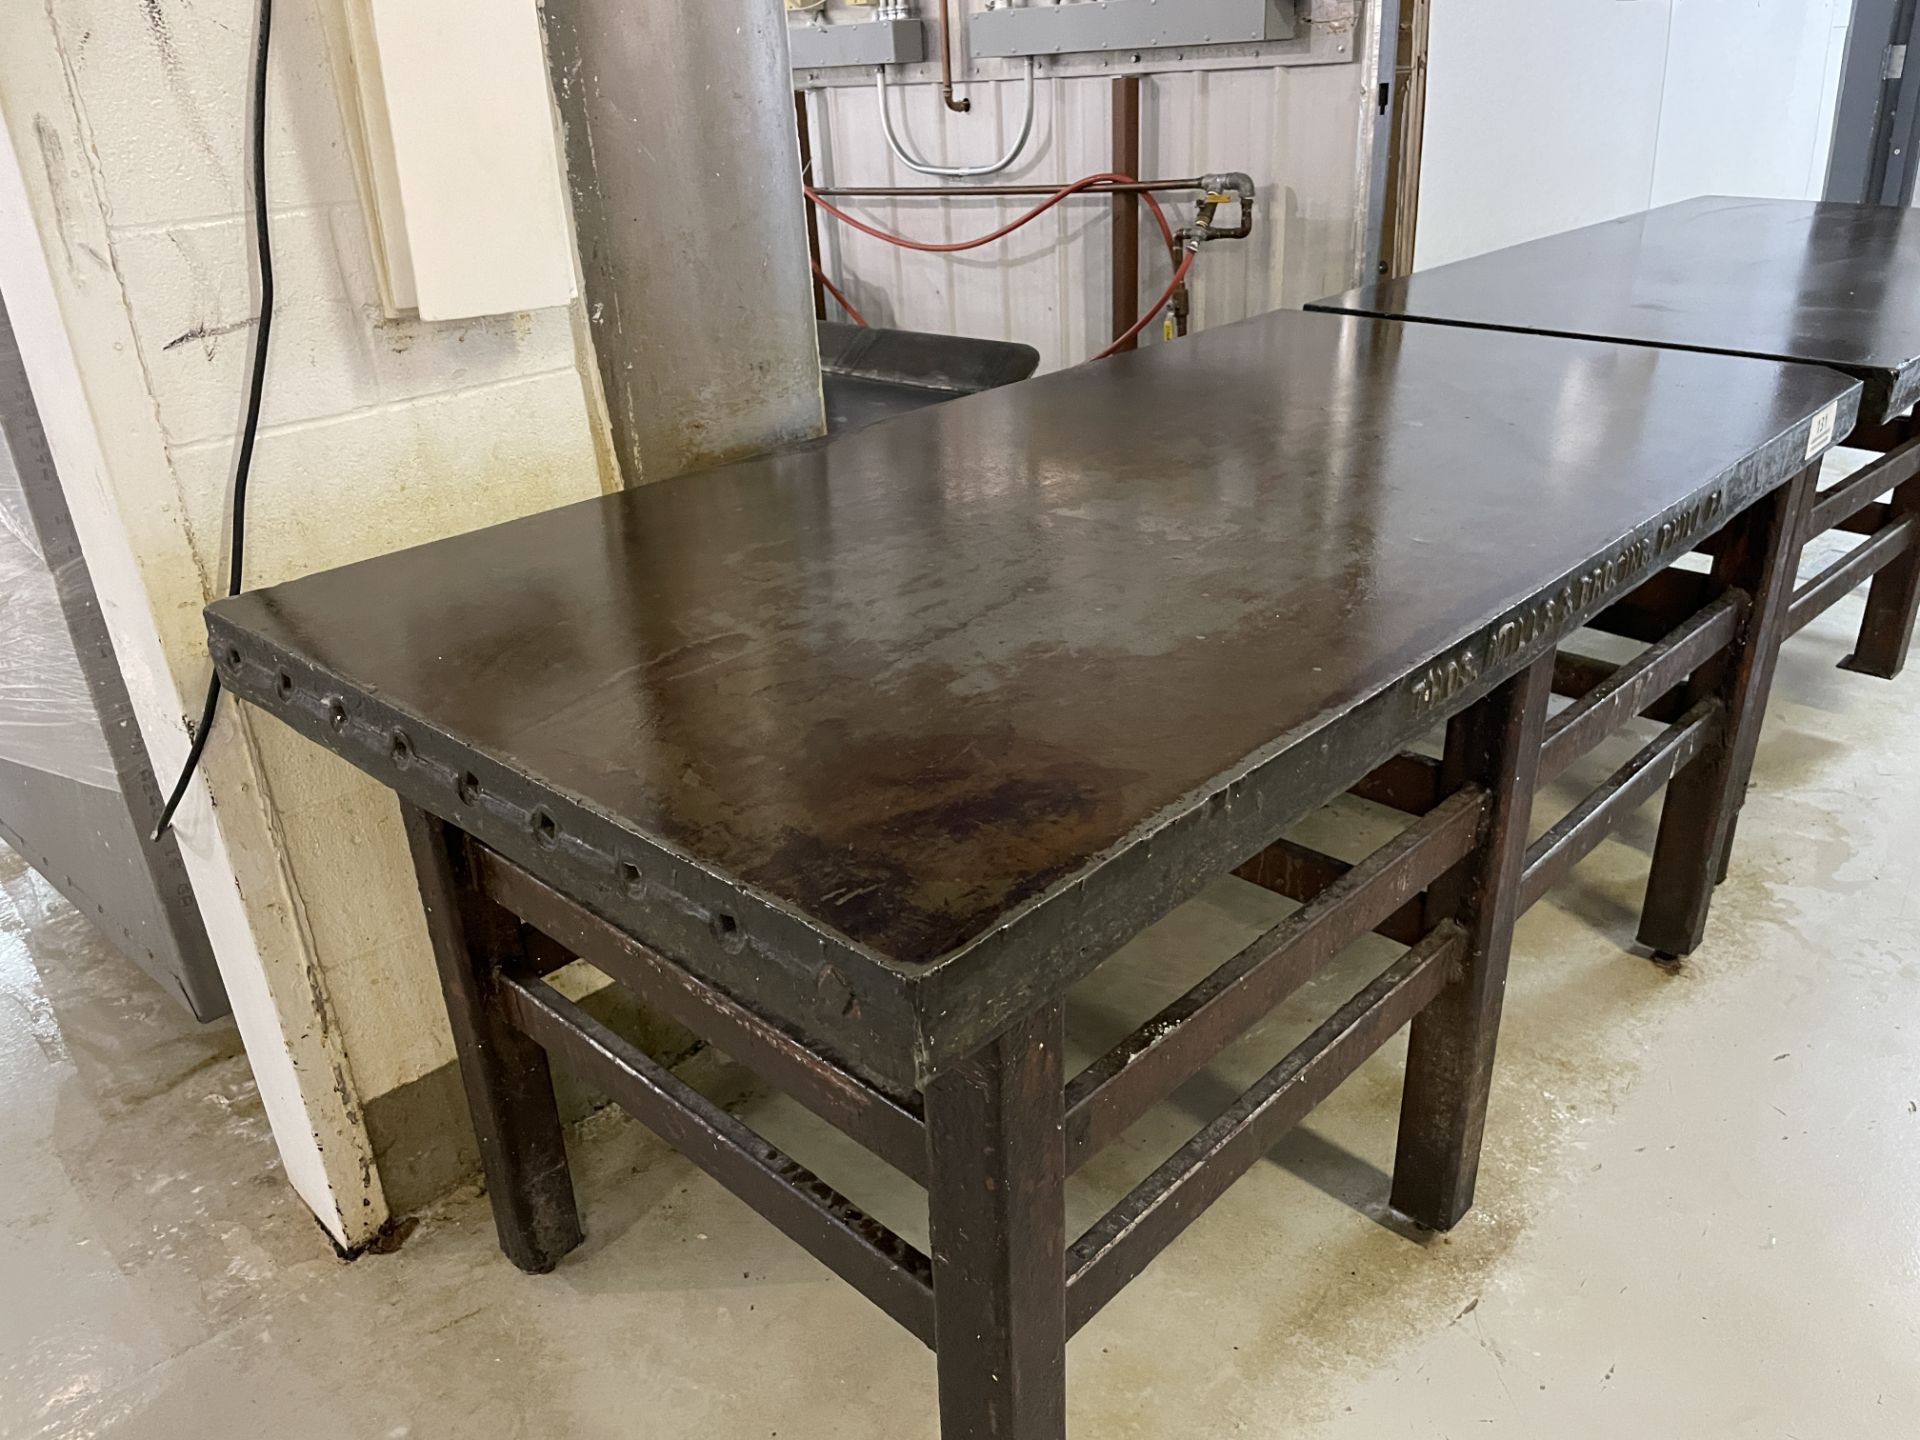 Asset 131 - Thomas Mills 3 x 6 ft carbon steel water cooled candy tables ~ Location: Canajoharie, - Image 2 of 2